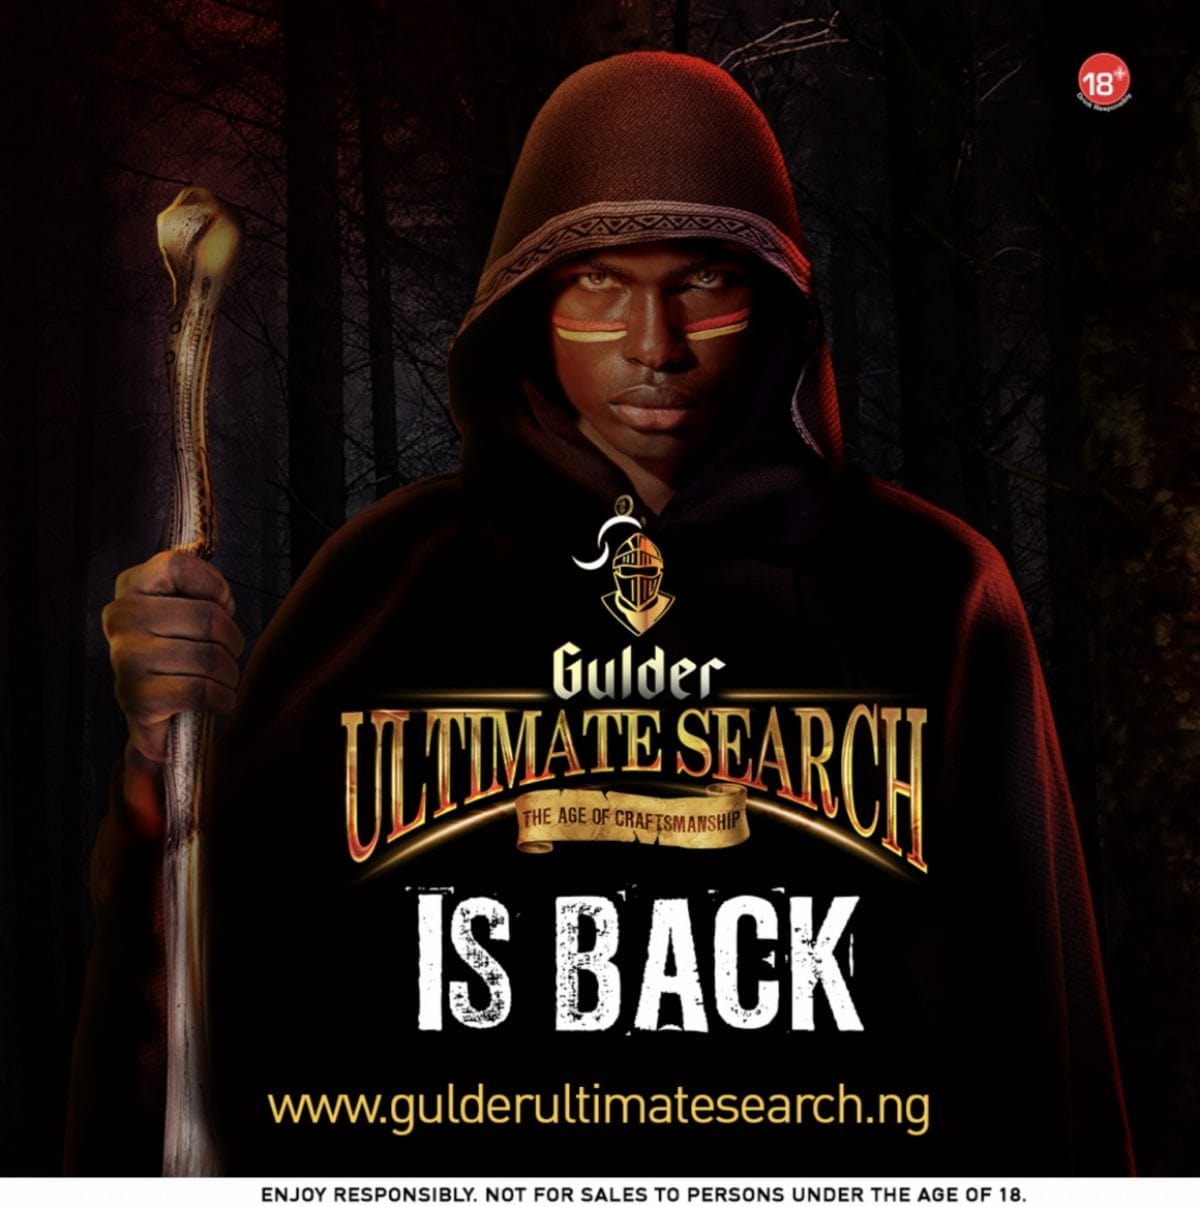 Gulder Ultimate Search Partners DStv for Season 12. Here’s All You Need To Know